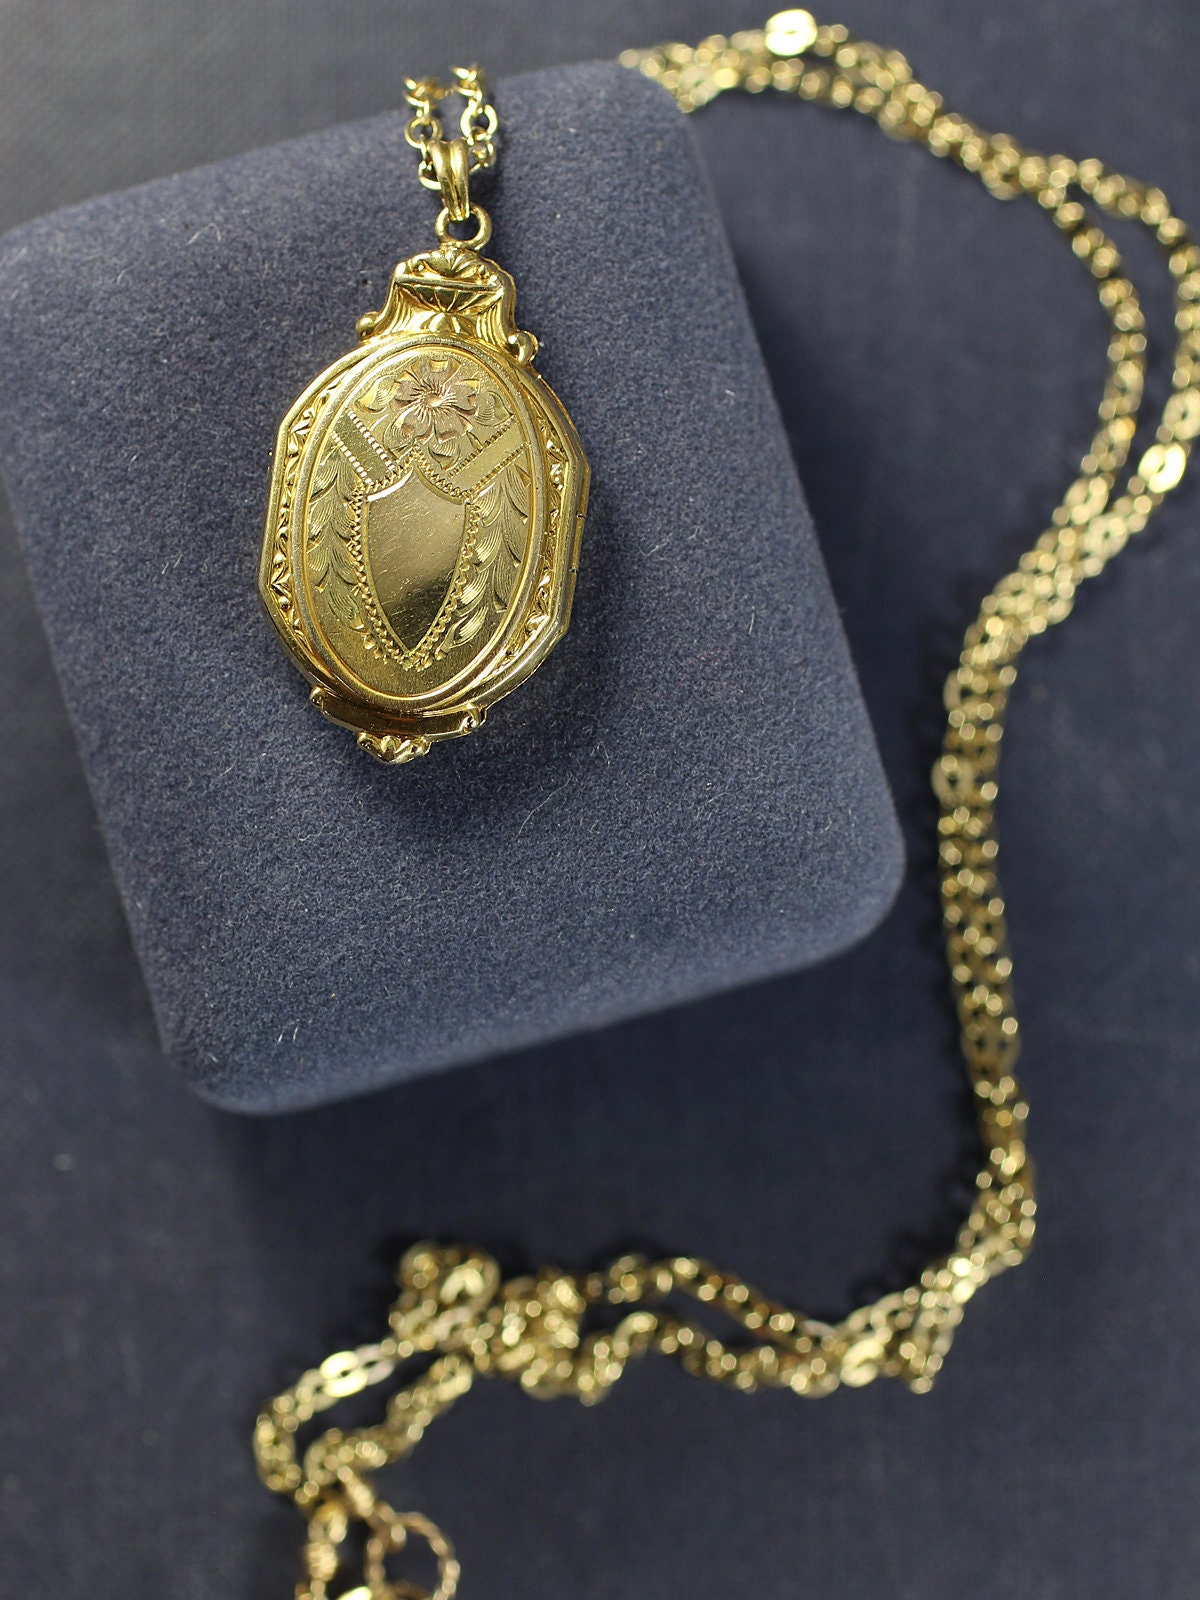 Antique 12k Gold Filled Locket Necklace, Circa 1920's 1930's Photo ...